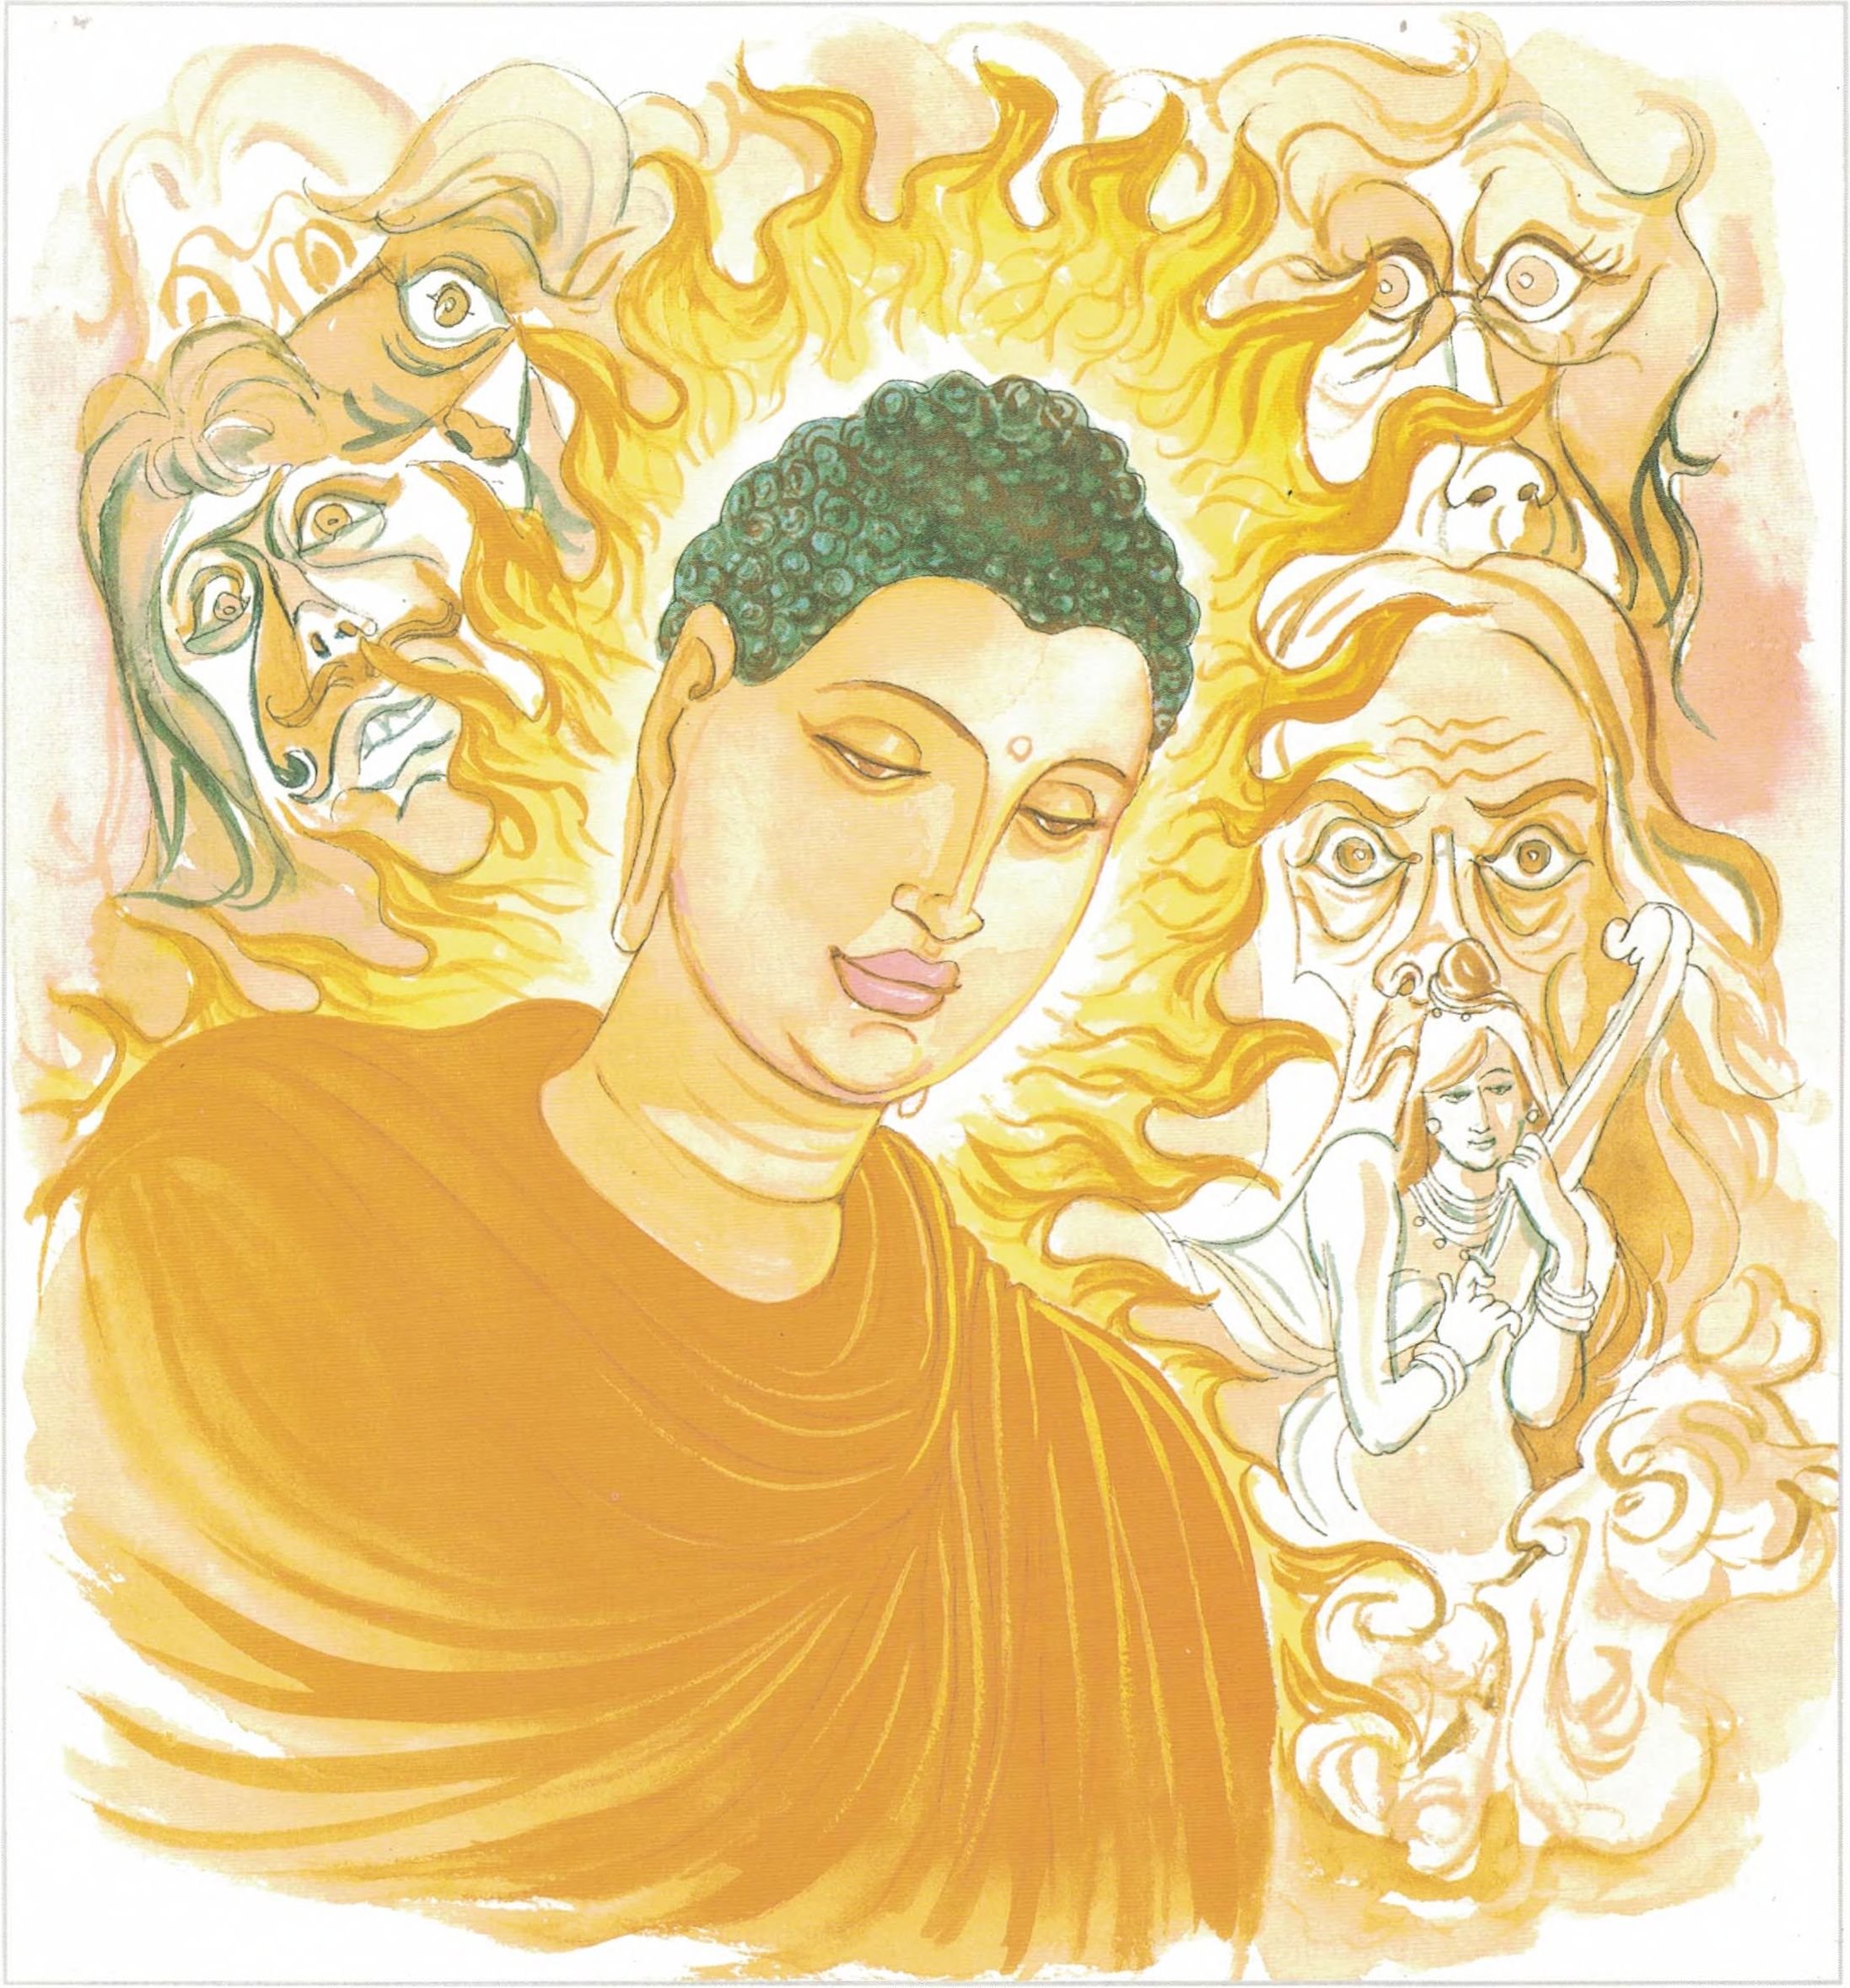 The Buddha Cannot Be Brought Under Sway